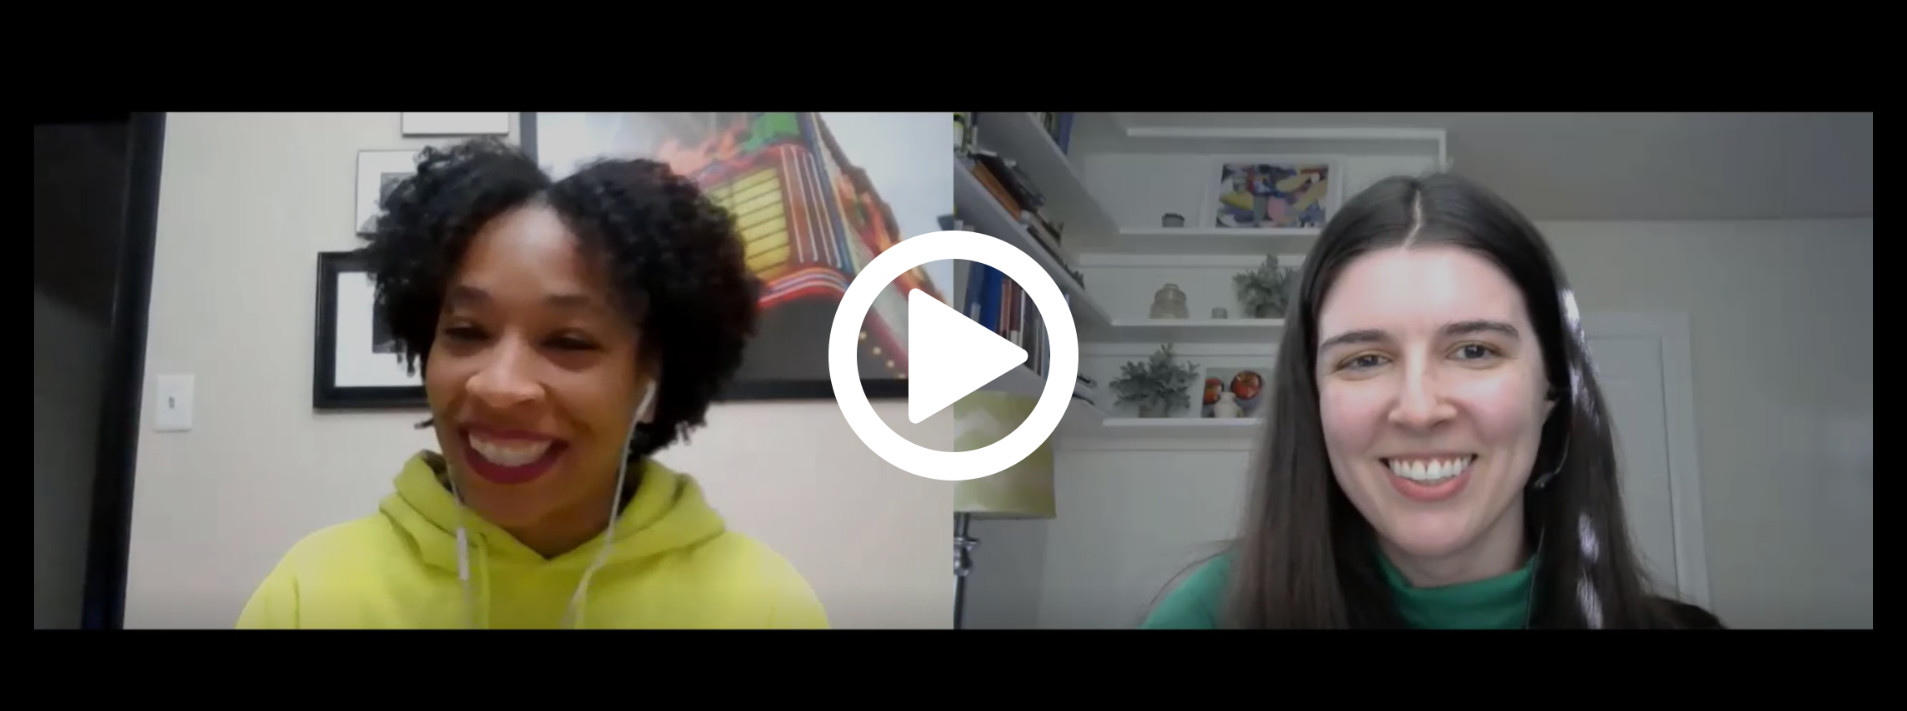 Click on the image to play a video of Hannah Covington of the News Literacy Project talking with Candace Buckner of The Washington Post over Zoom about Buckner’s role as a sports columnist.